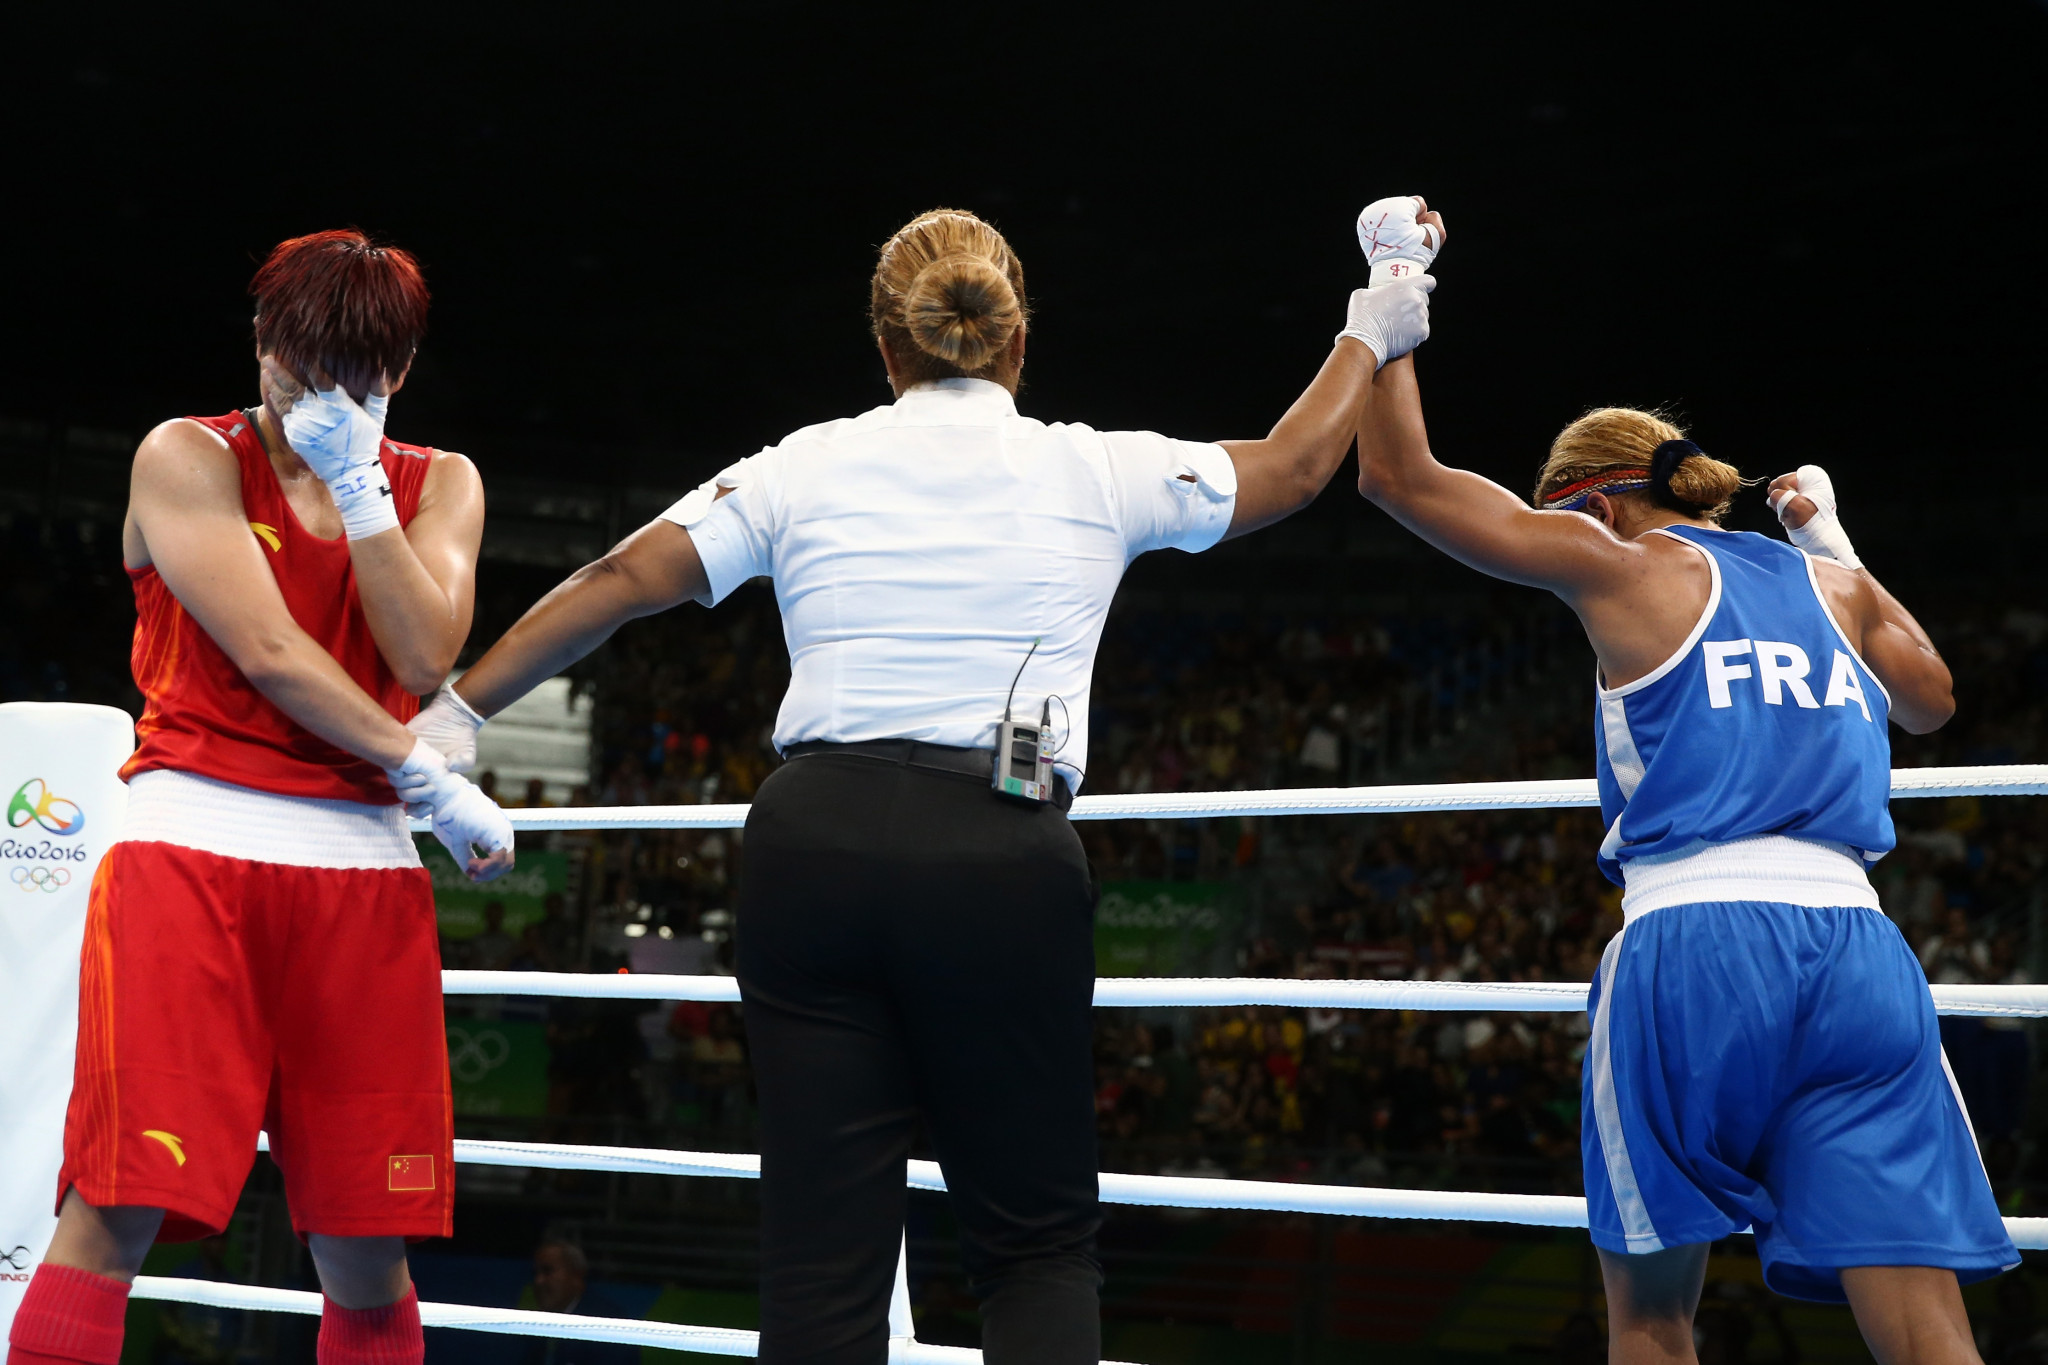 French boxers won six medals at Rio 2016, but none at Tokyo 2020 ©Getty Images